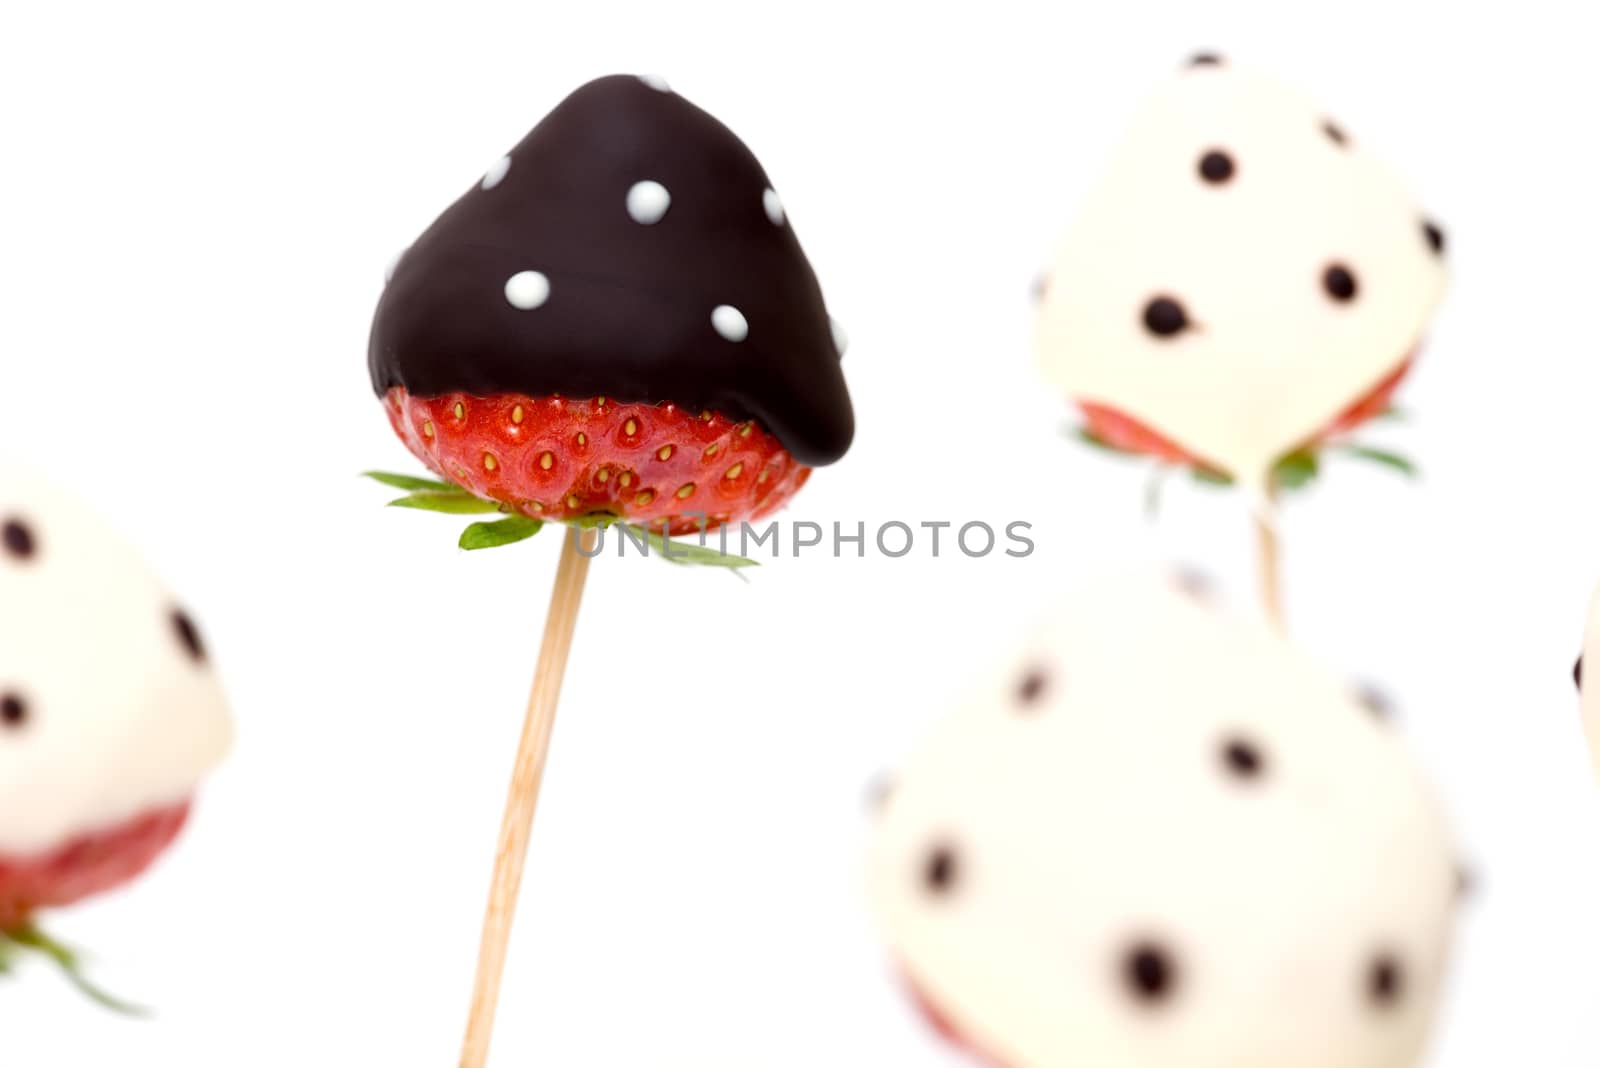 Chocolate covered strawberry by DNKSTUDIO